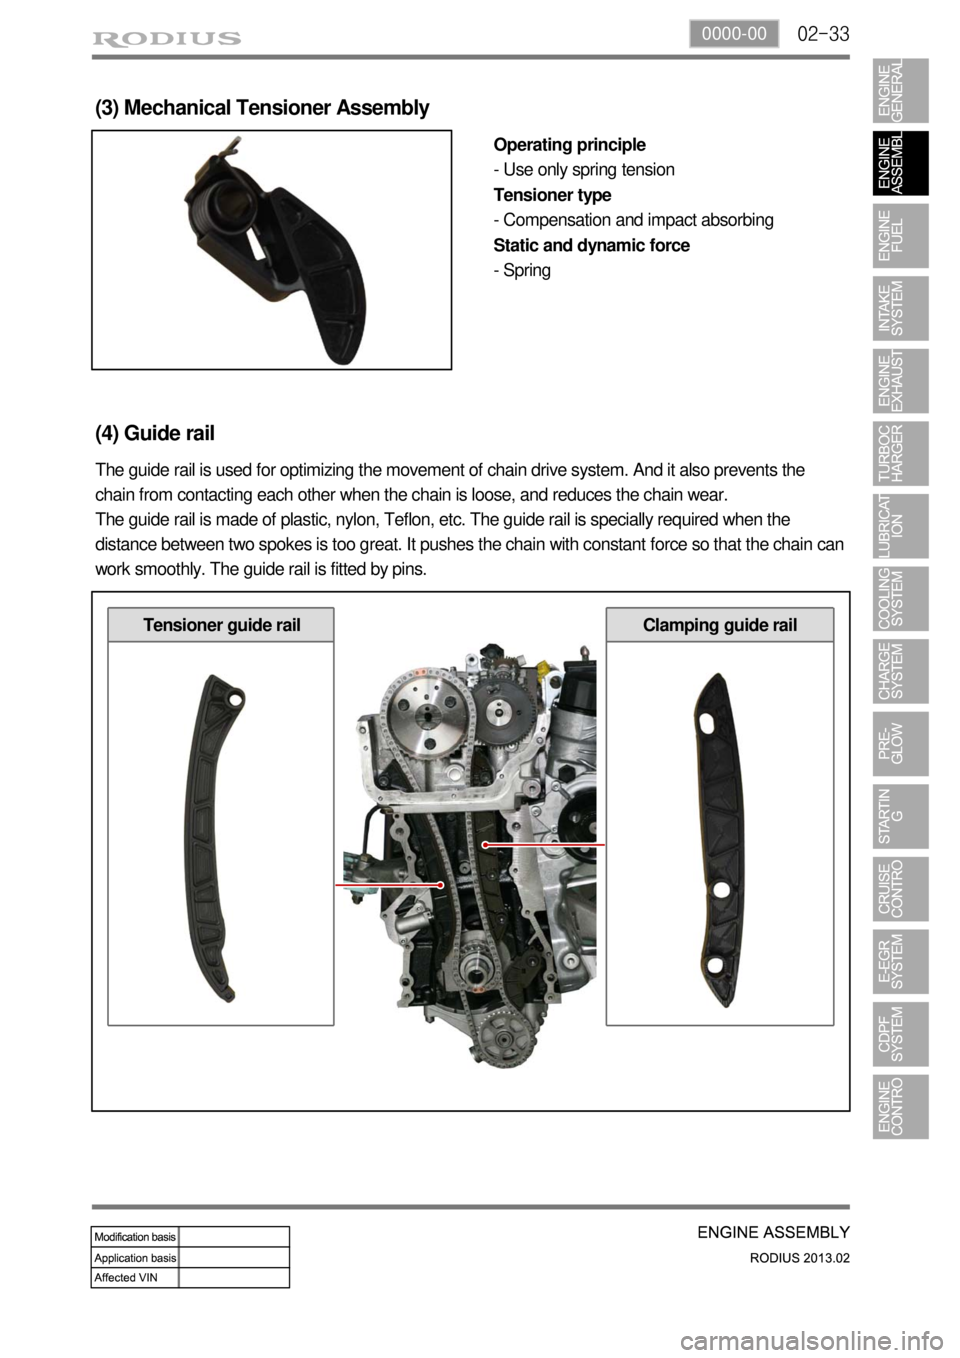 SSANGYONG TURISMO 2013  Service Manual 02-330000-00
Clamping guide railTensioner guide rail
(3) Mechanical Tensioner Assembly
Operating principle
- Use only spring tension
Tensioner type
- Compensation and impact absorbing
Static and dynam